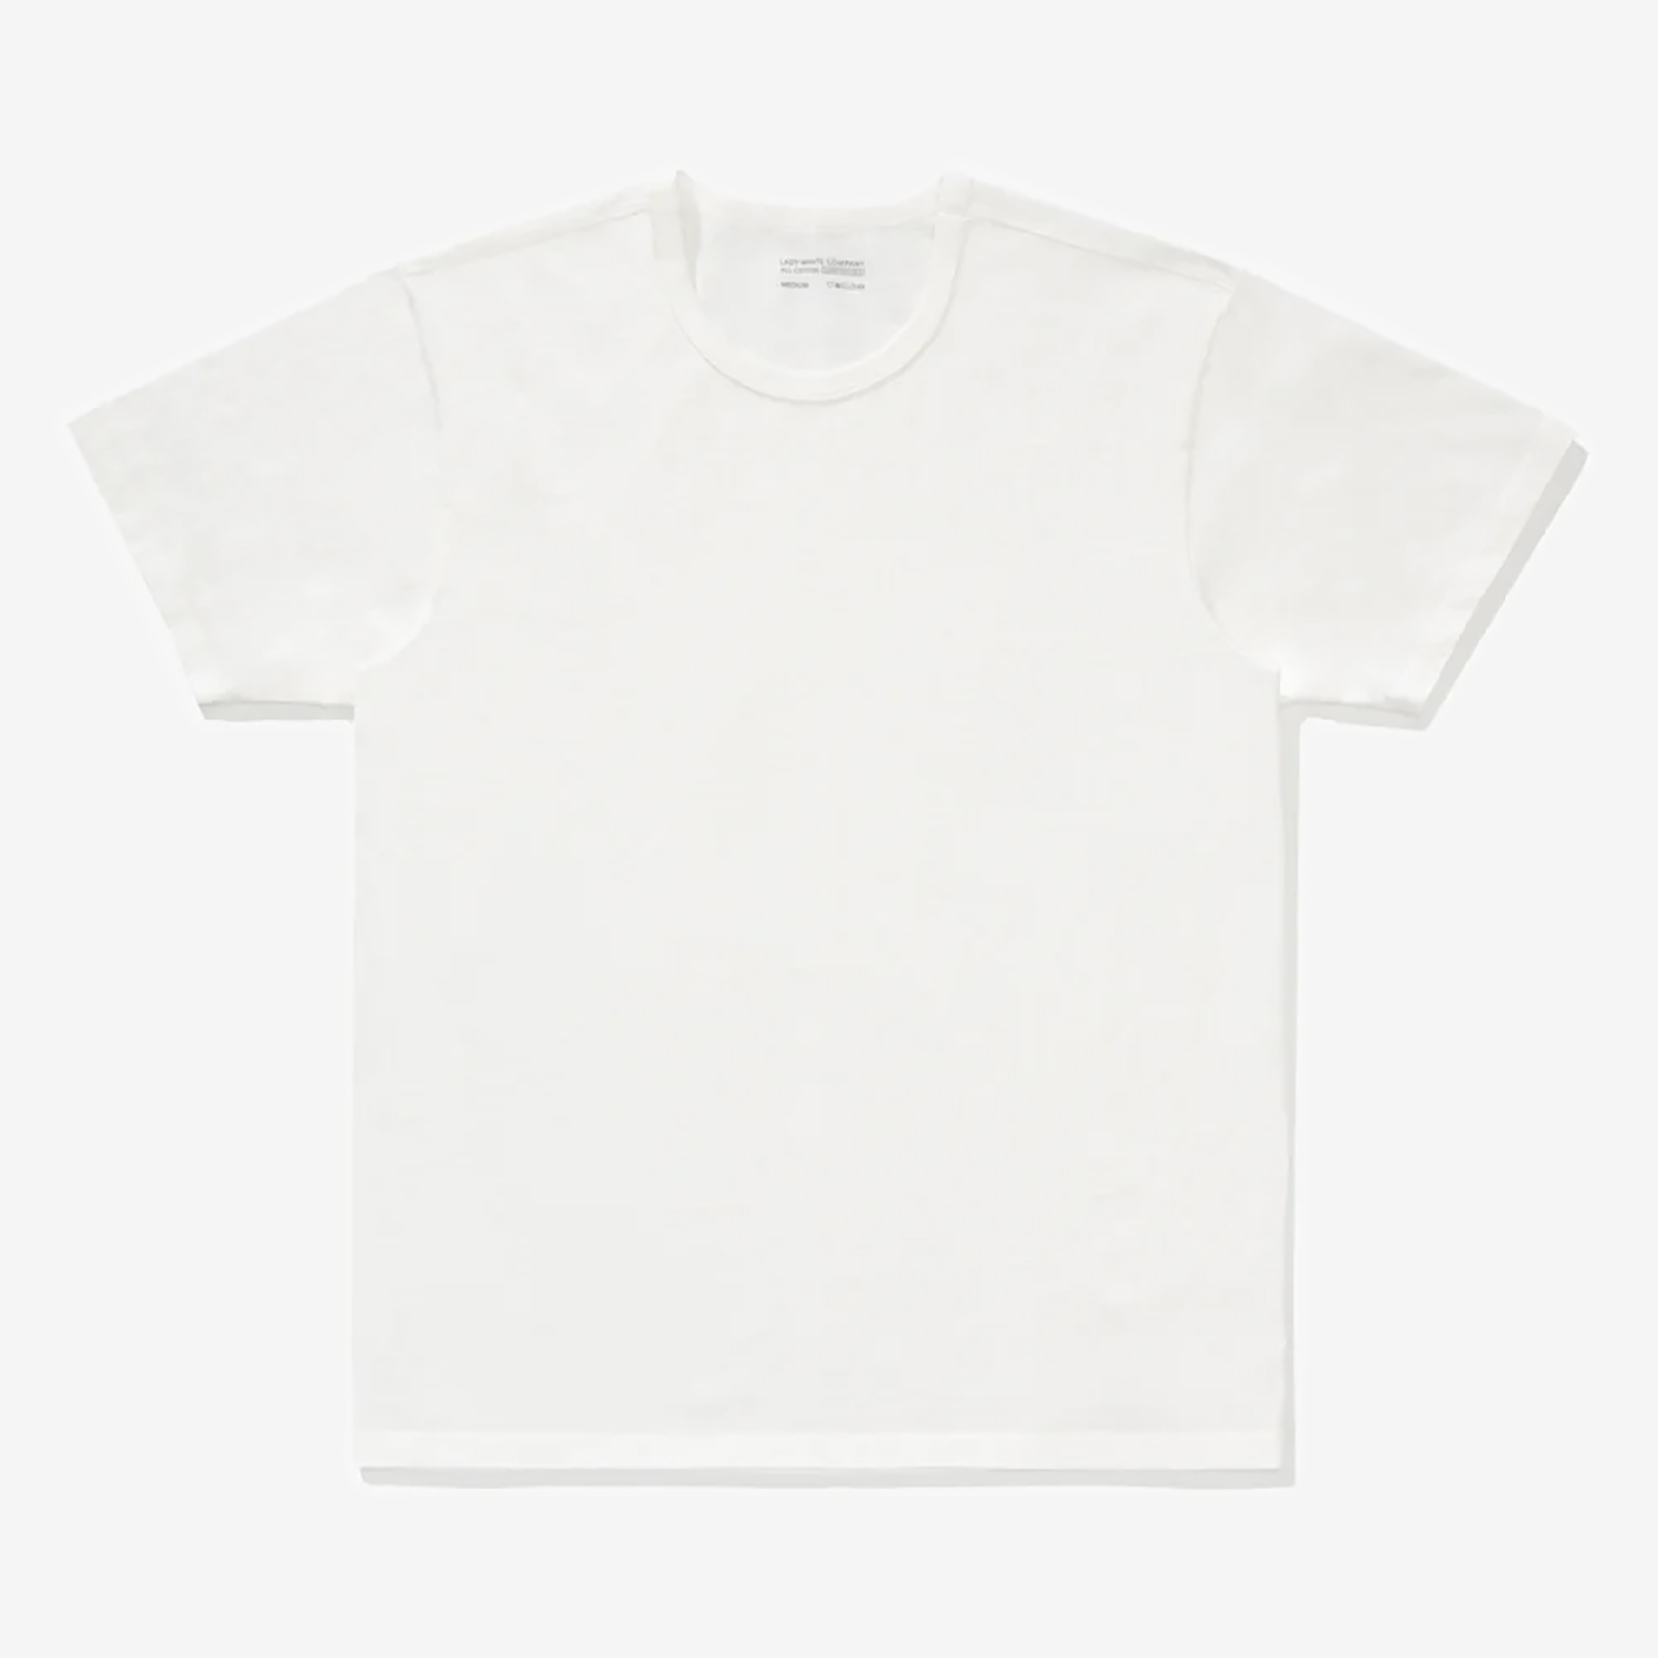 Lady White Co - T-Shirt 2-Pack (White)